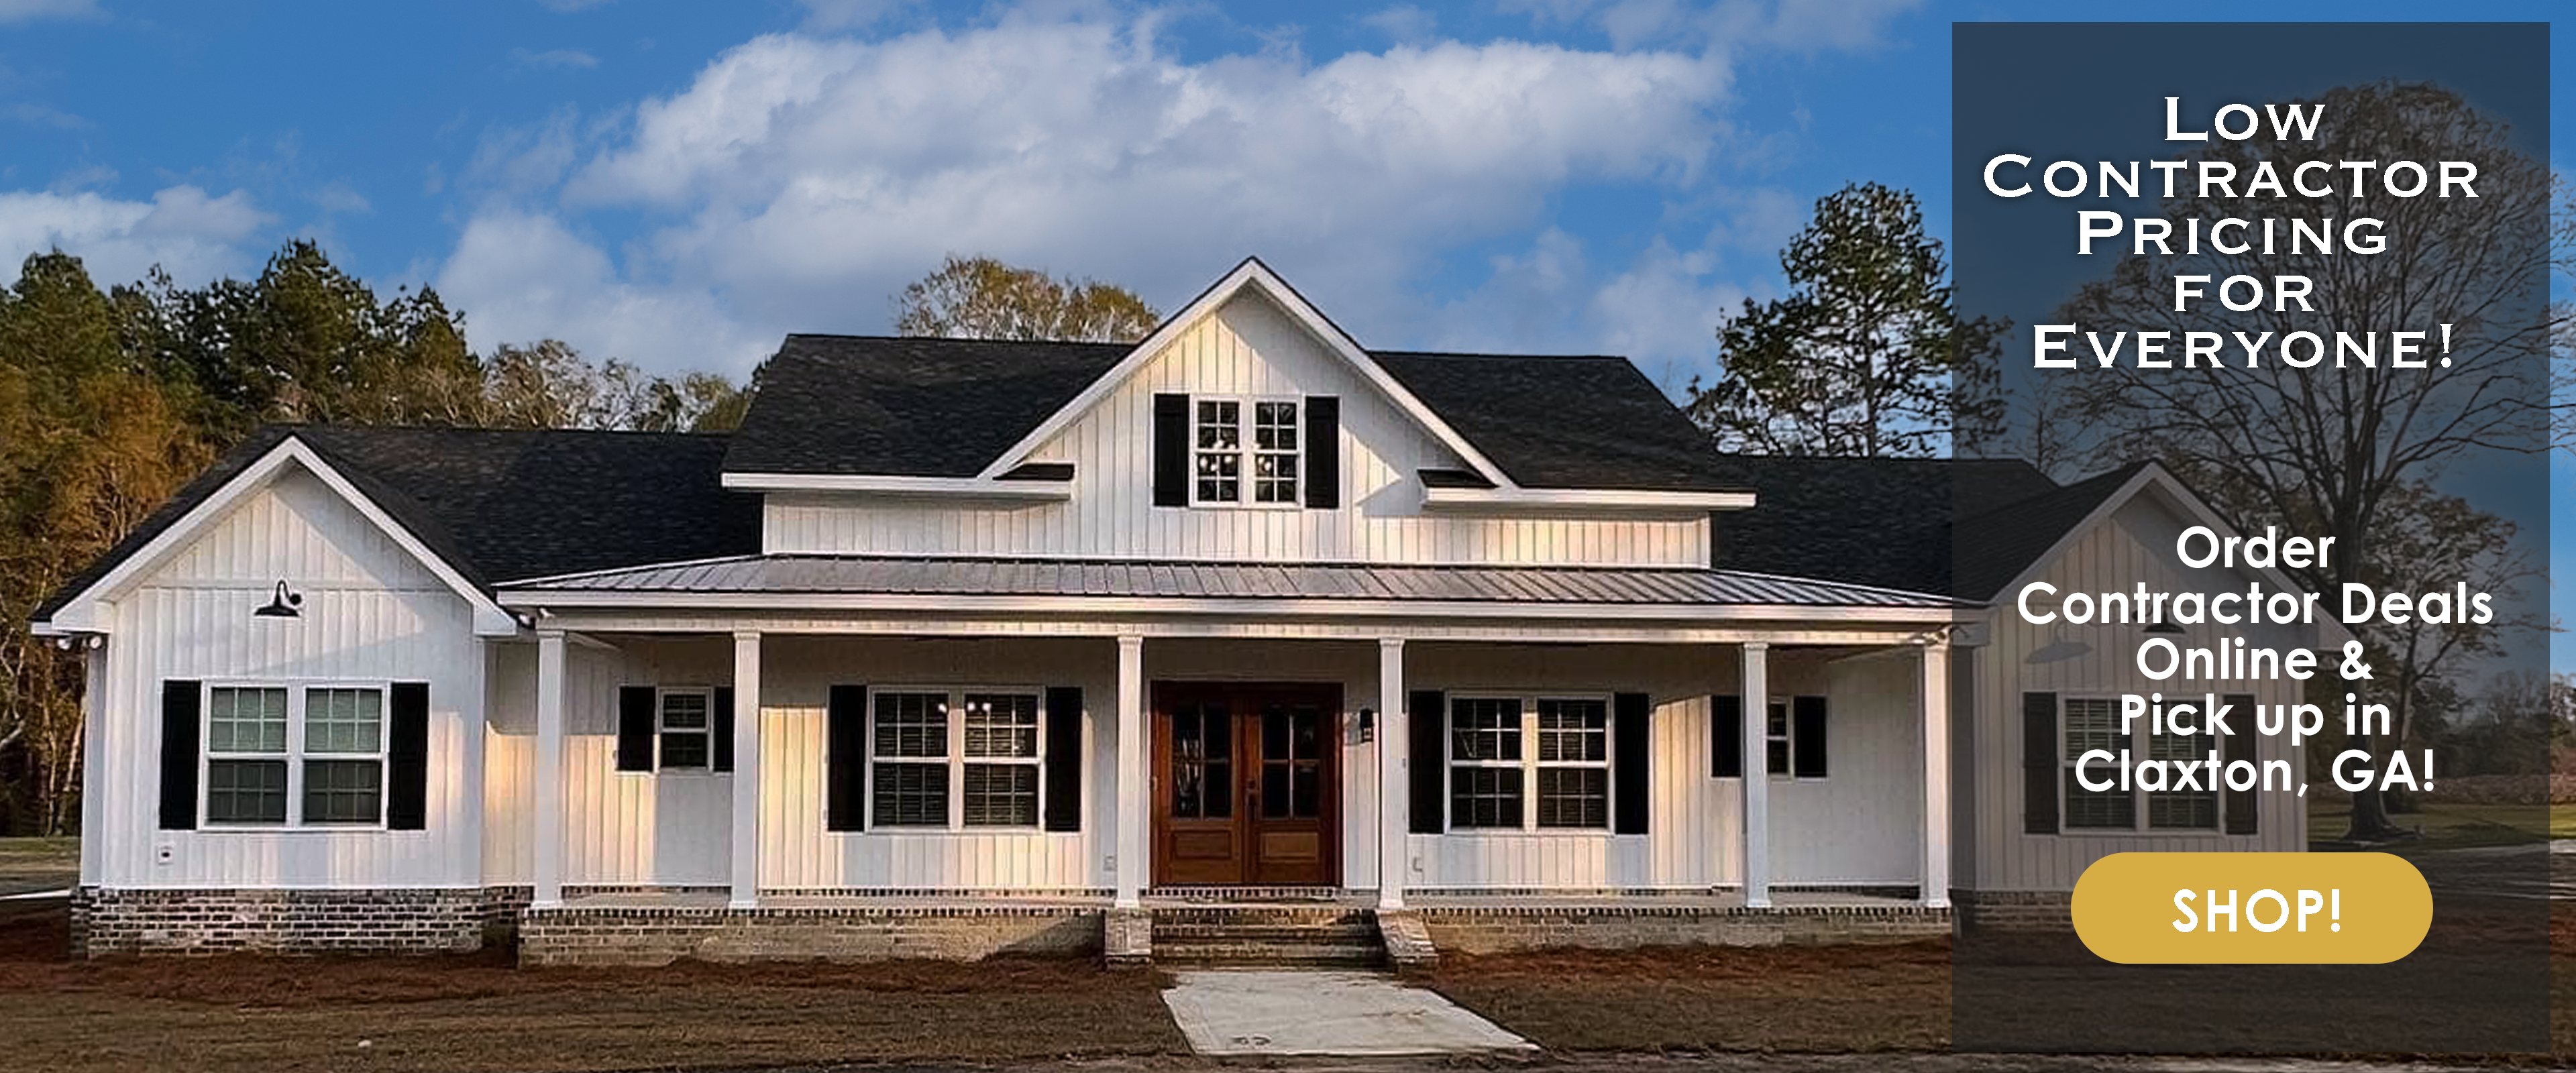 Contractor Deals: Purchase Online and Pick Up in Claxton, GA!